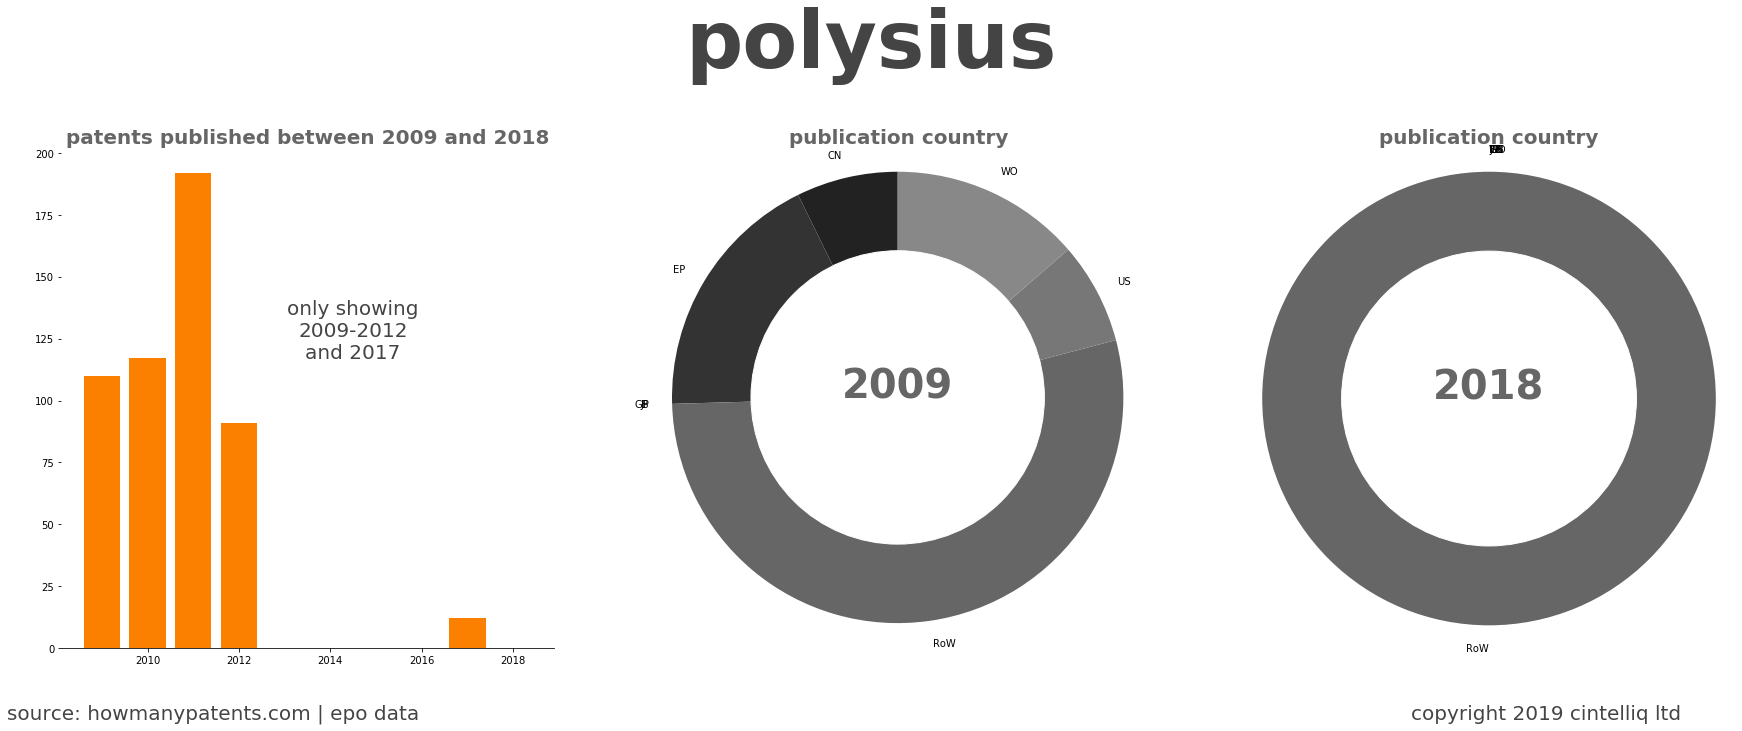 summary of patents for Polysius